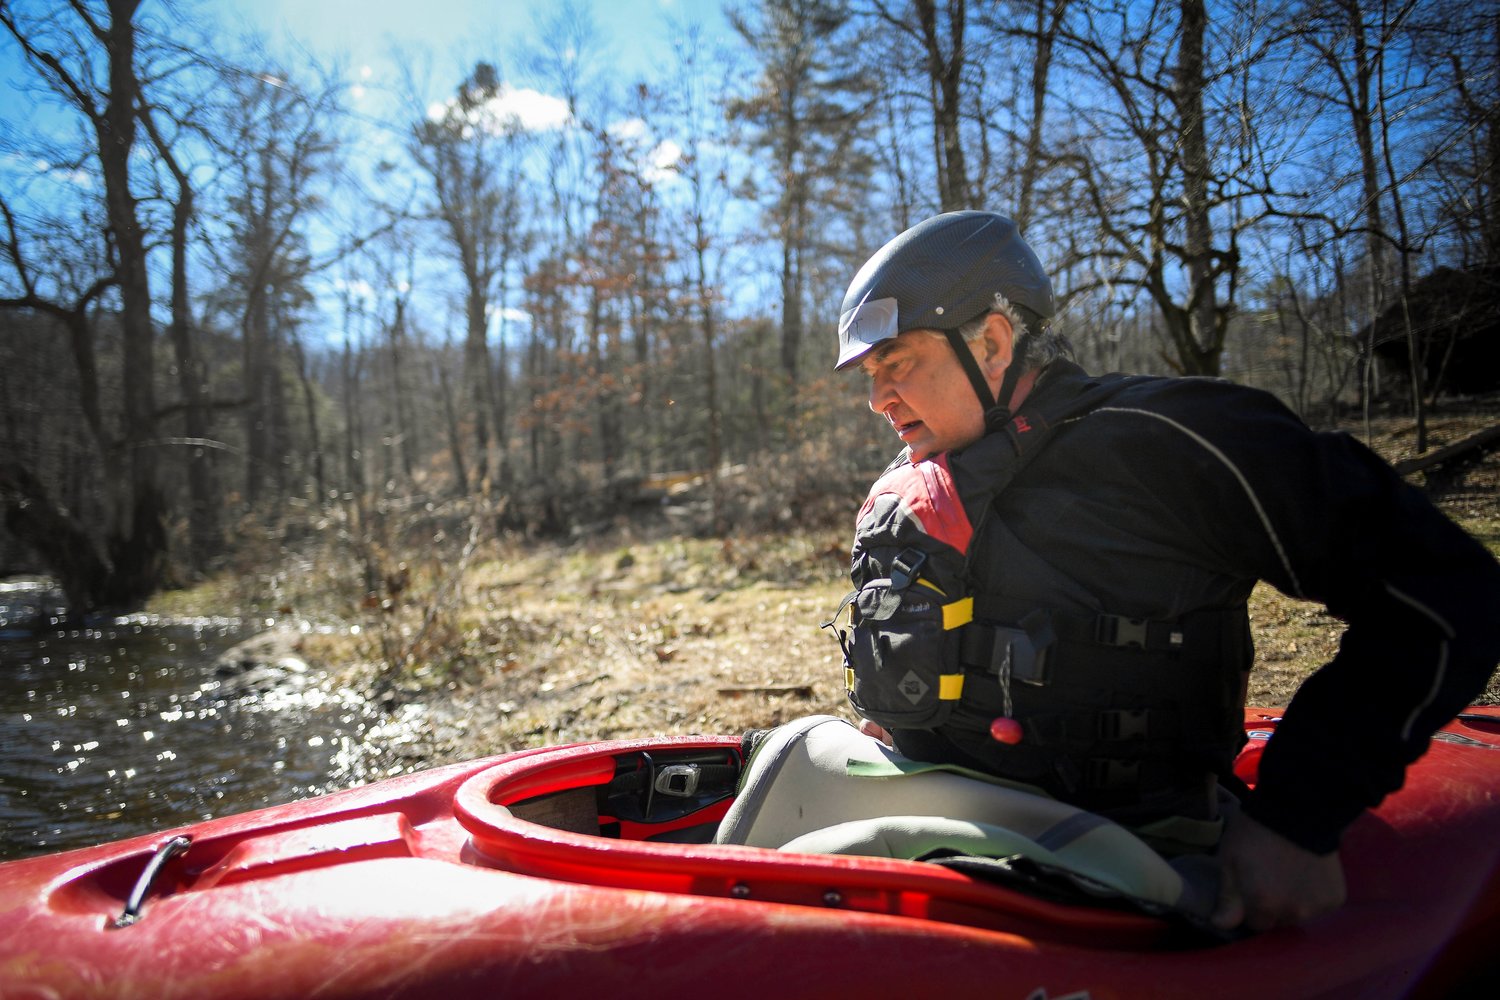 Scott Douglas of Springtown secures his waist rubber to the lip of the kayak before launch on March 19.